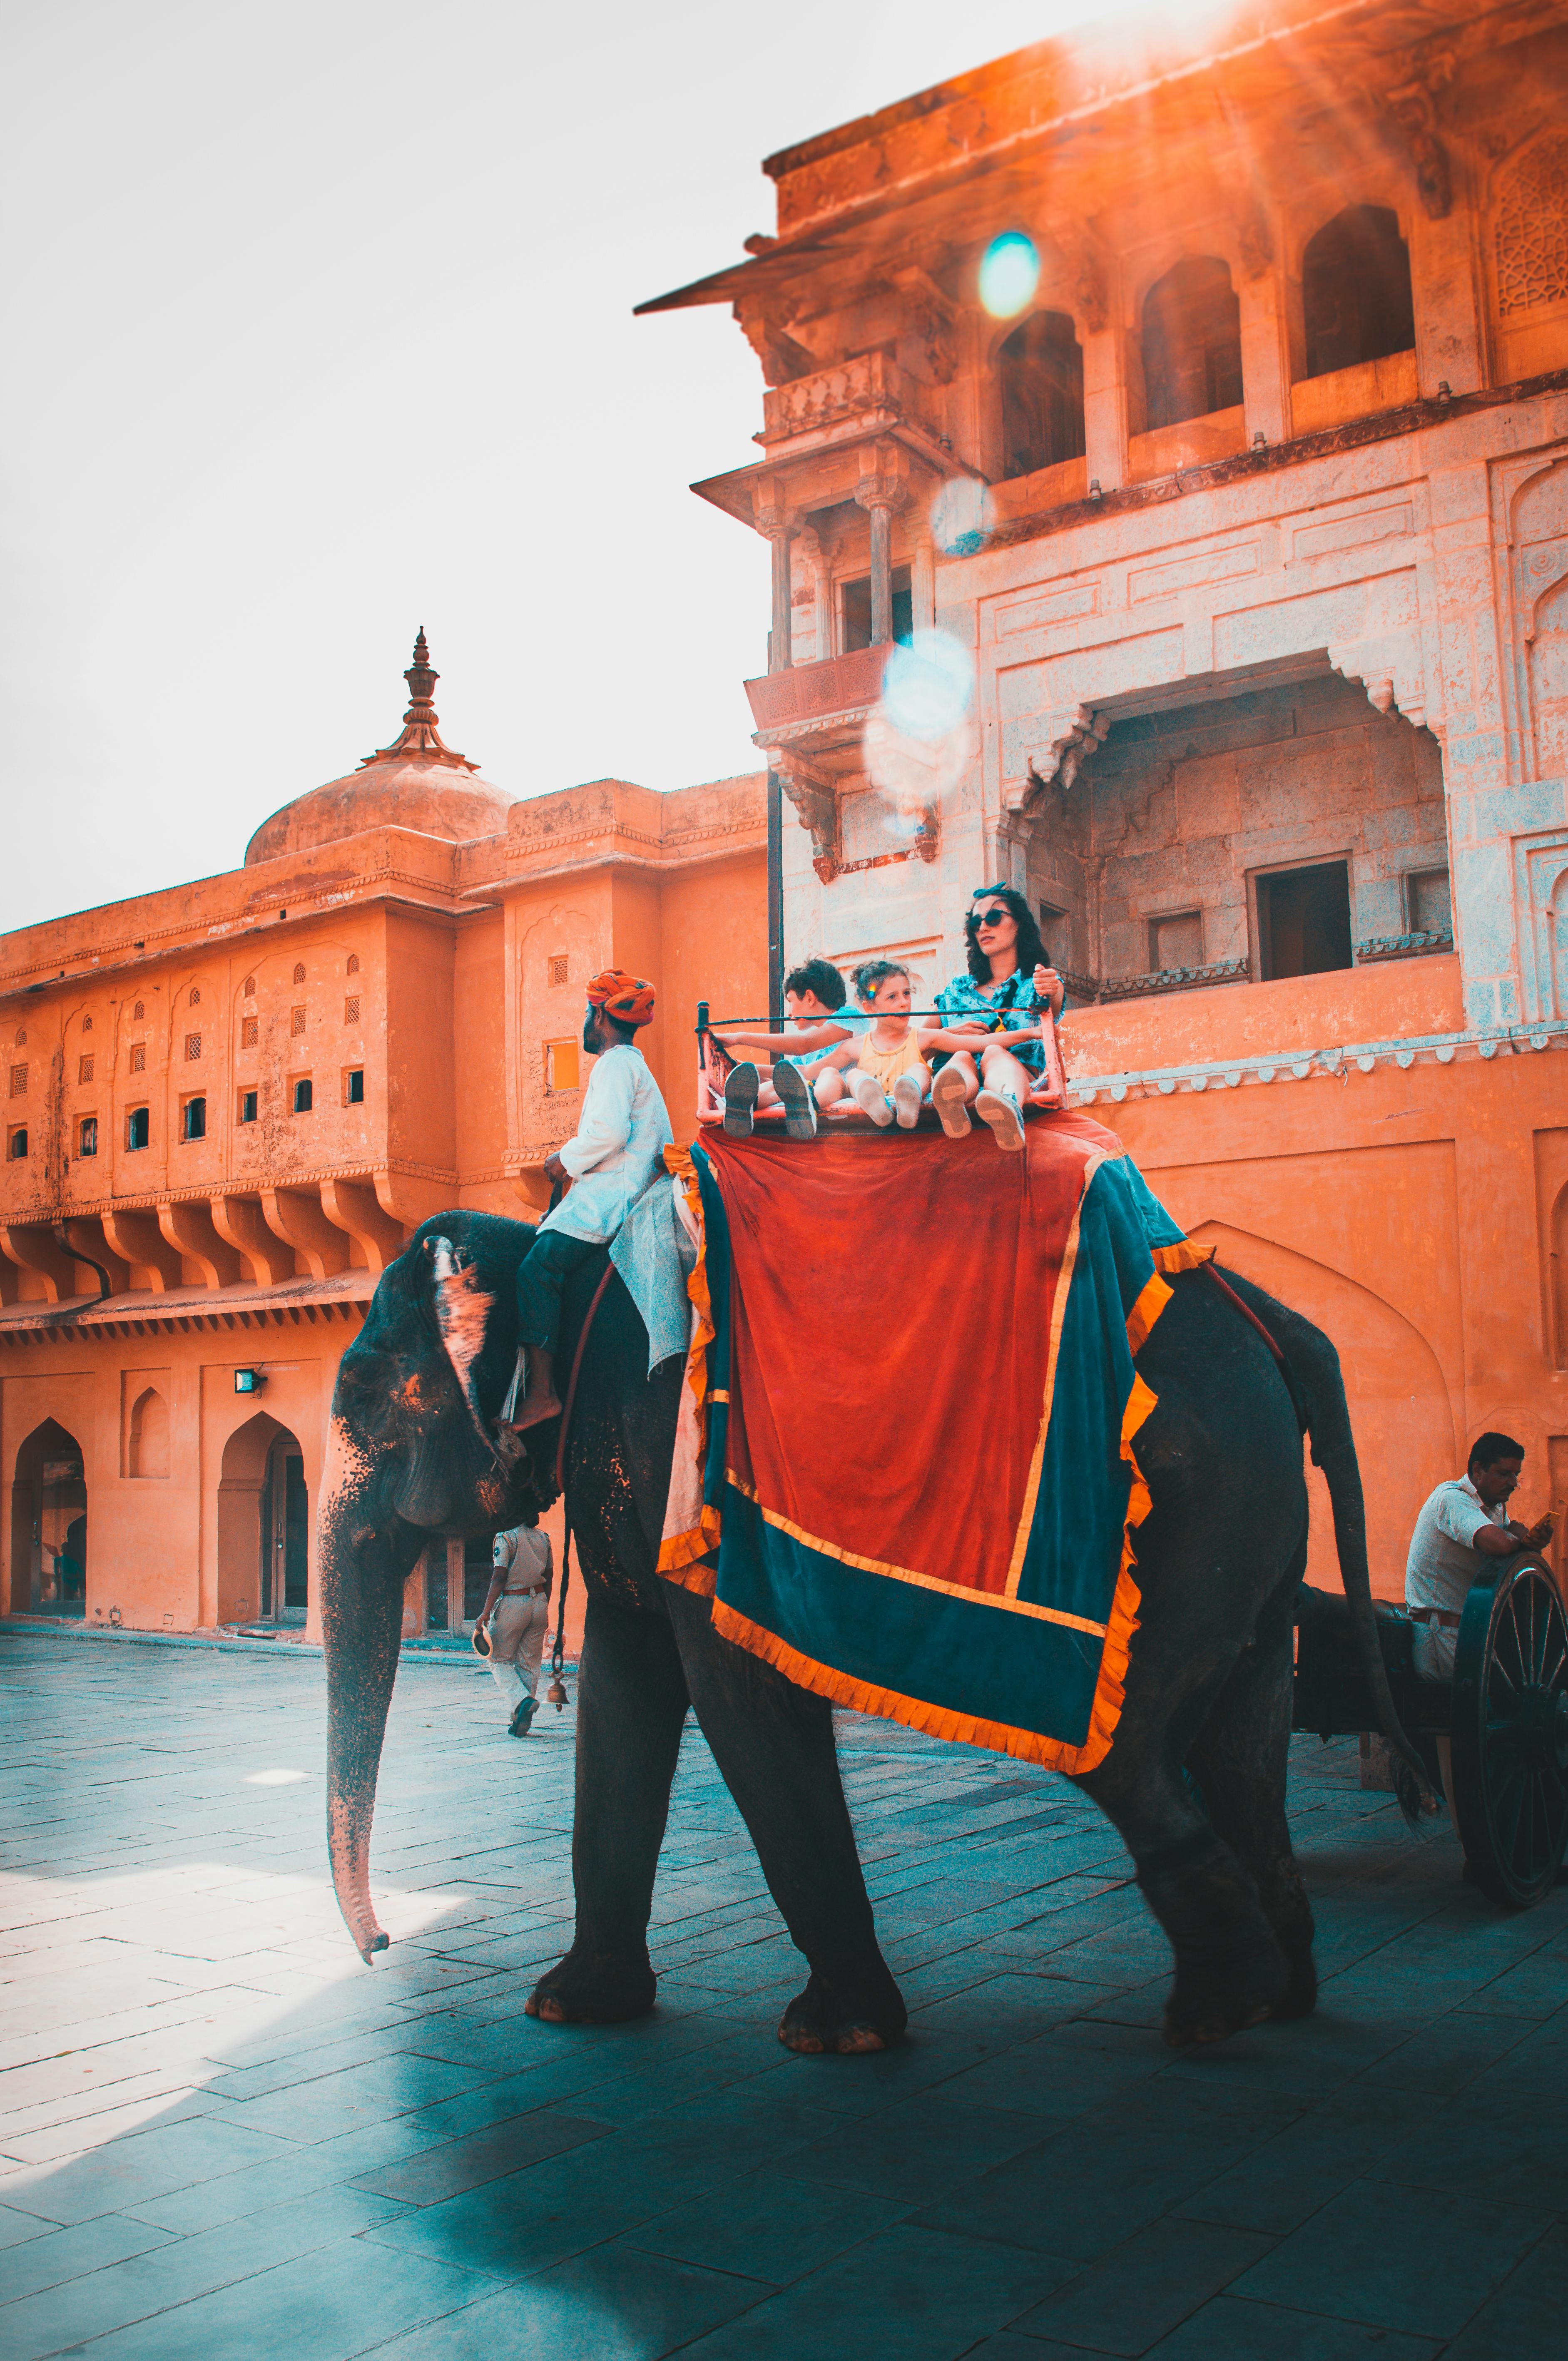 Rajasthan Photos, Download The BEST Free Rajasthan Stock Photos & HD Images